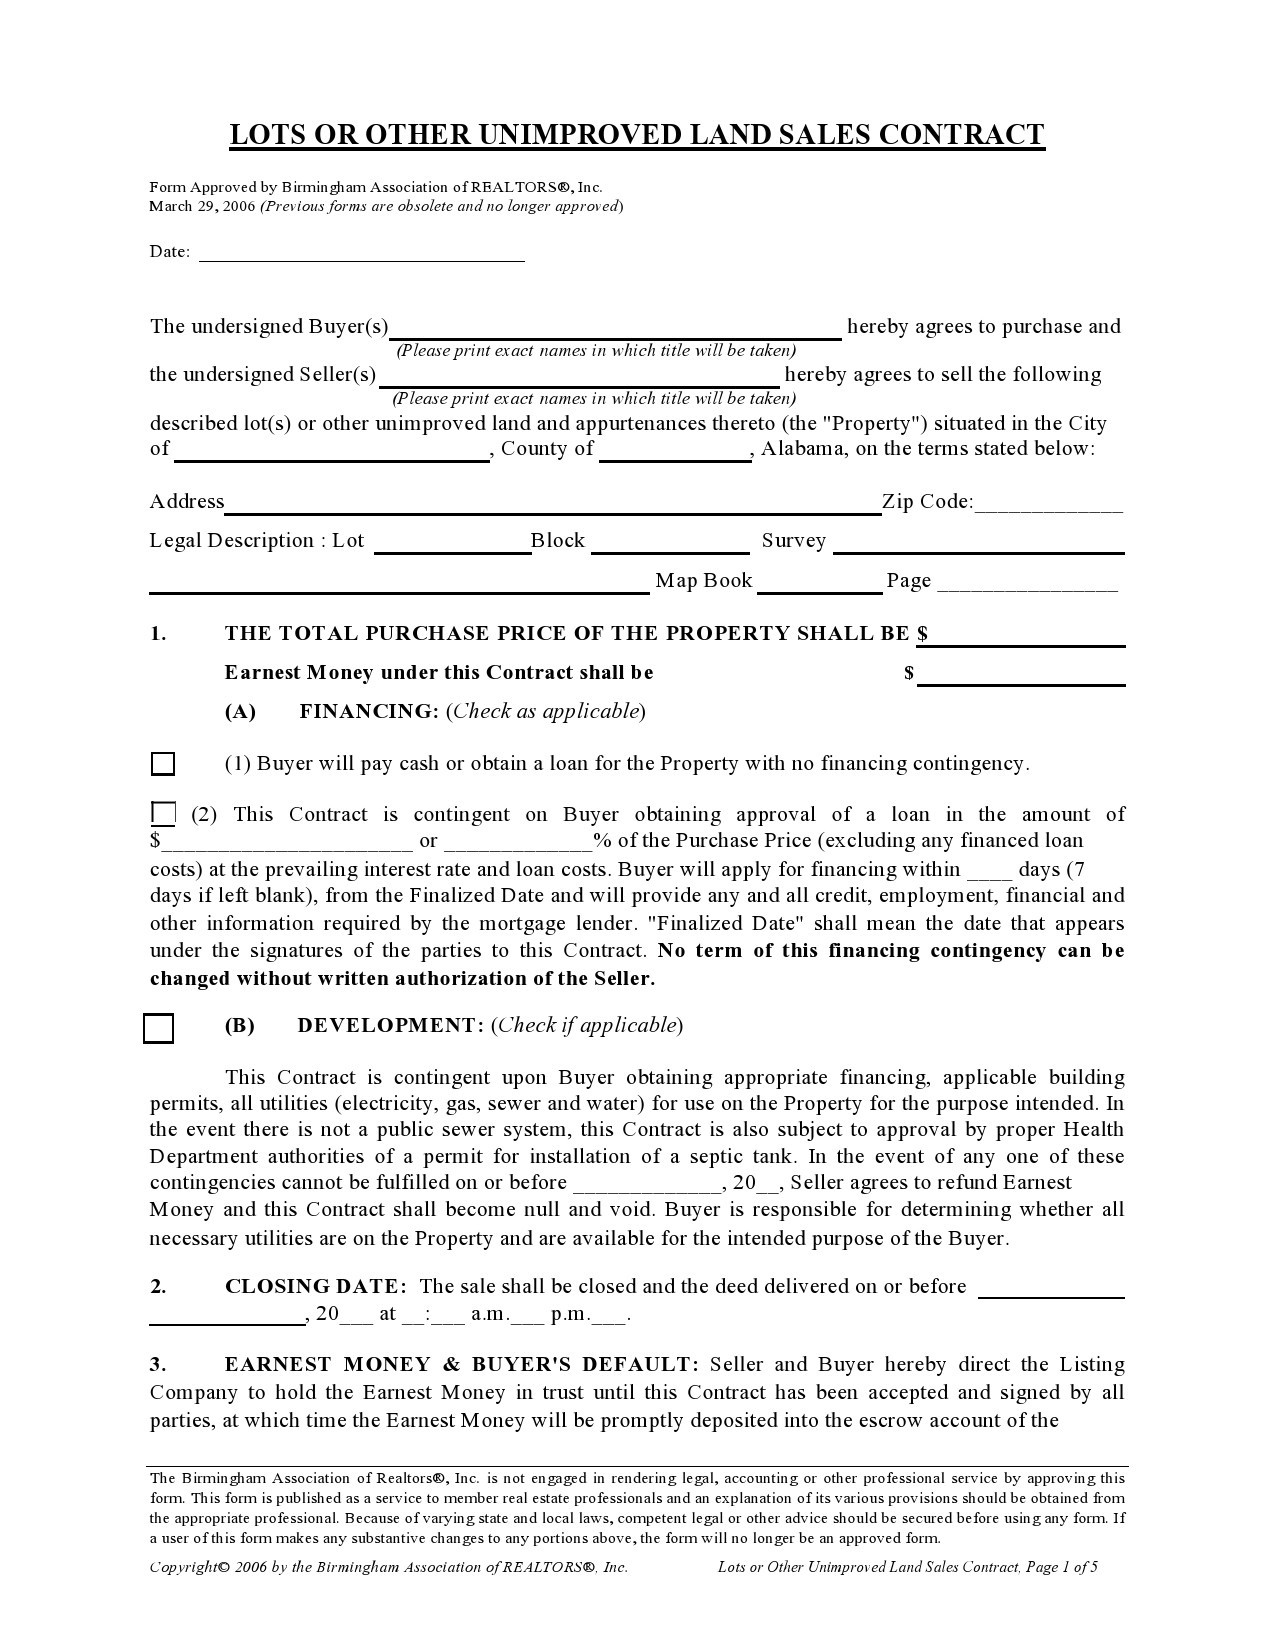 Free land contract form 21